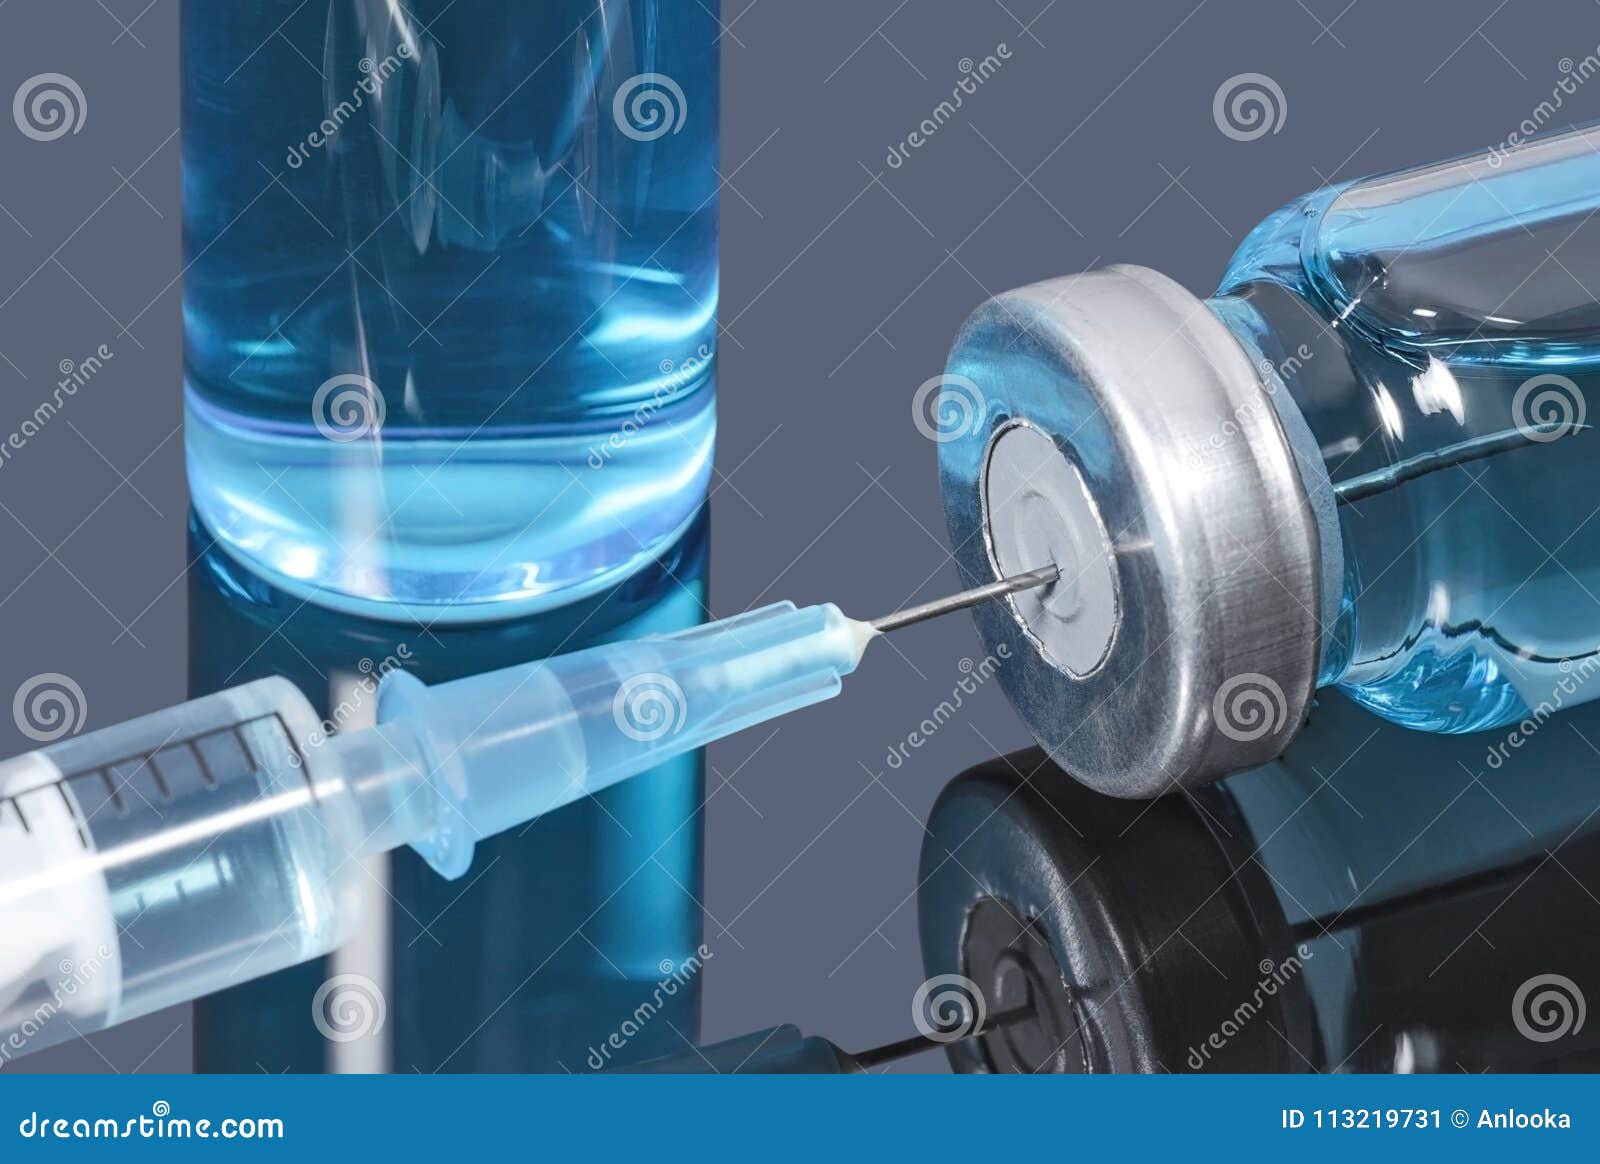 syringe with a needle stuck in a vial of blue vaccine on dark background